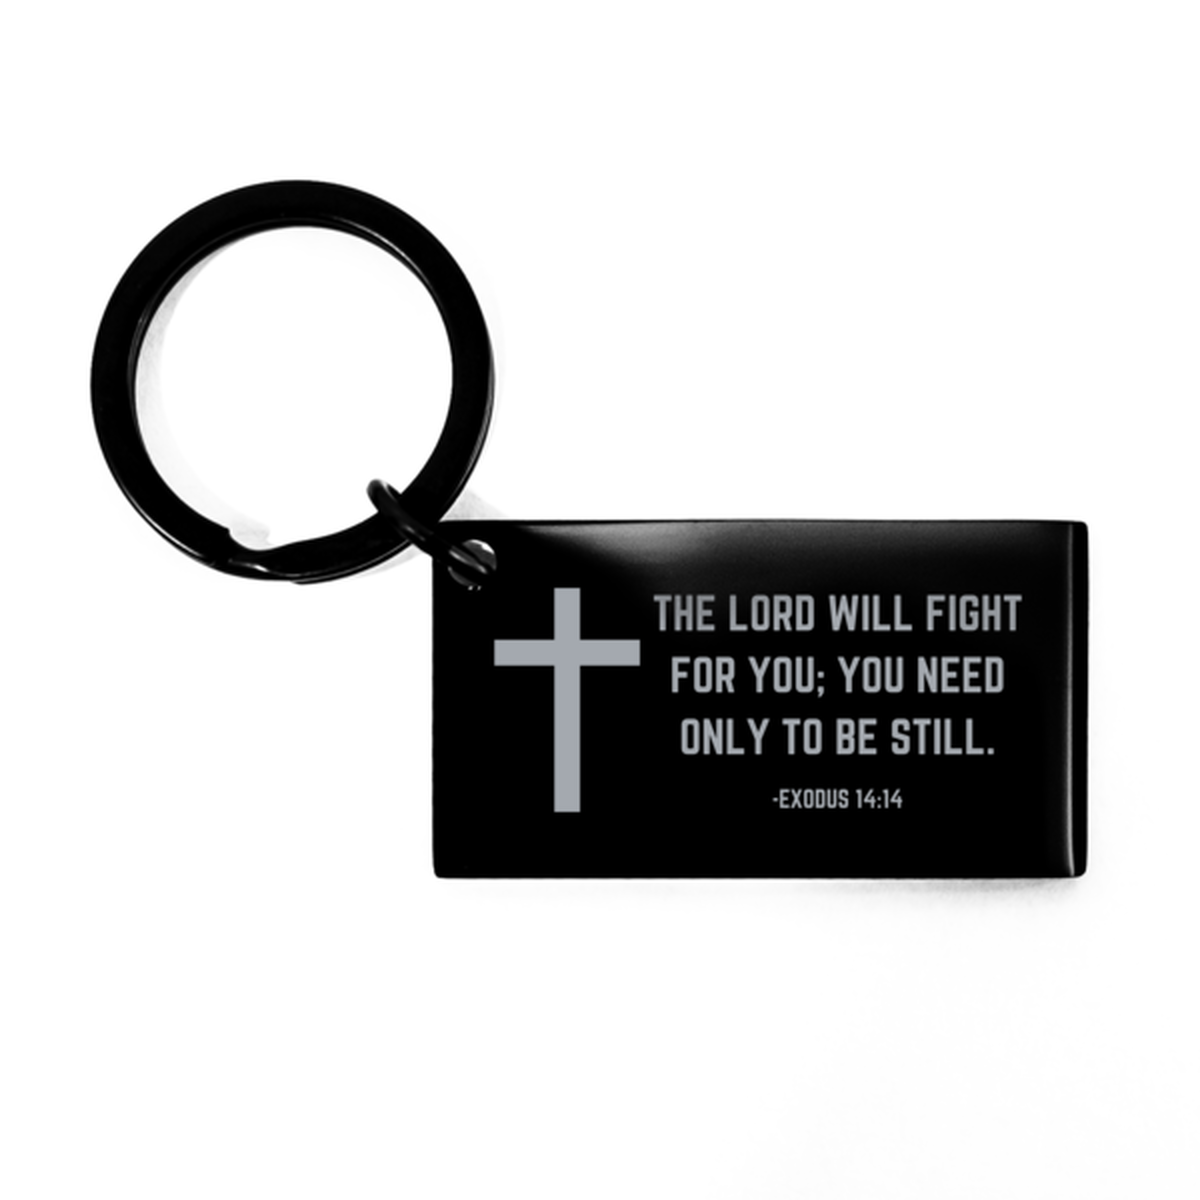 Baptism Gifts For Teenage Boys Girls, Christian Bible Verse Black Keychain, The Lord will fight for you, Confirmation Gifts, Bible Verse Keyring for Son, Godson, Grandson, Nephew